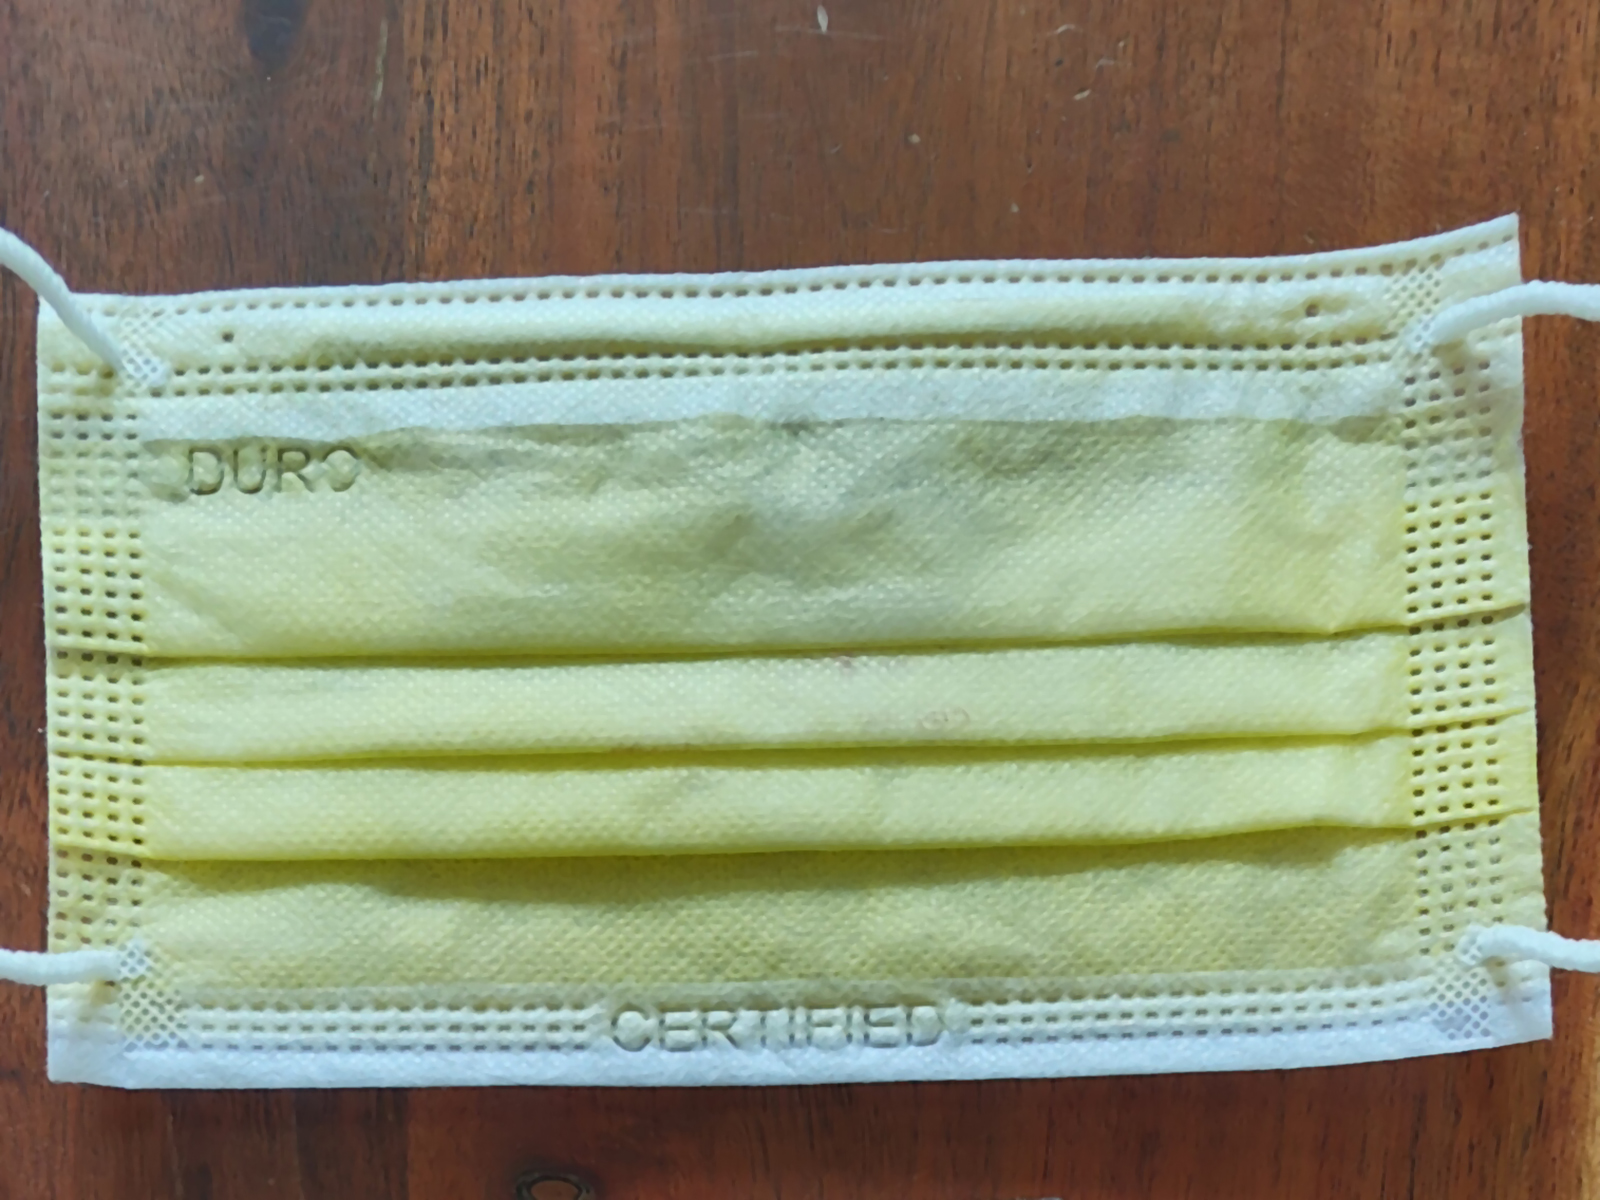 A polyester-based yellow surgical mask photographed with the Realme GT 2 Pro's primary 50MP camera.